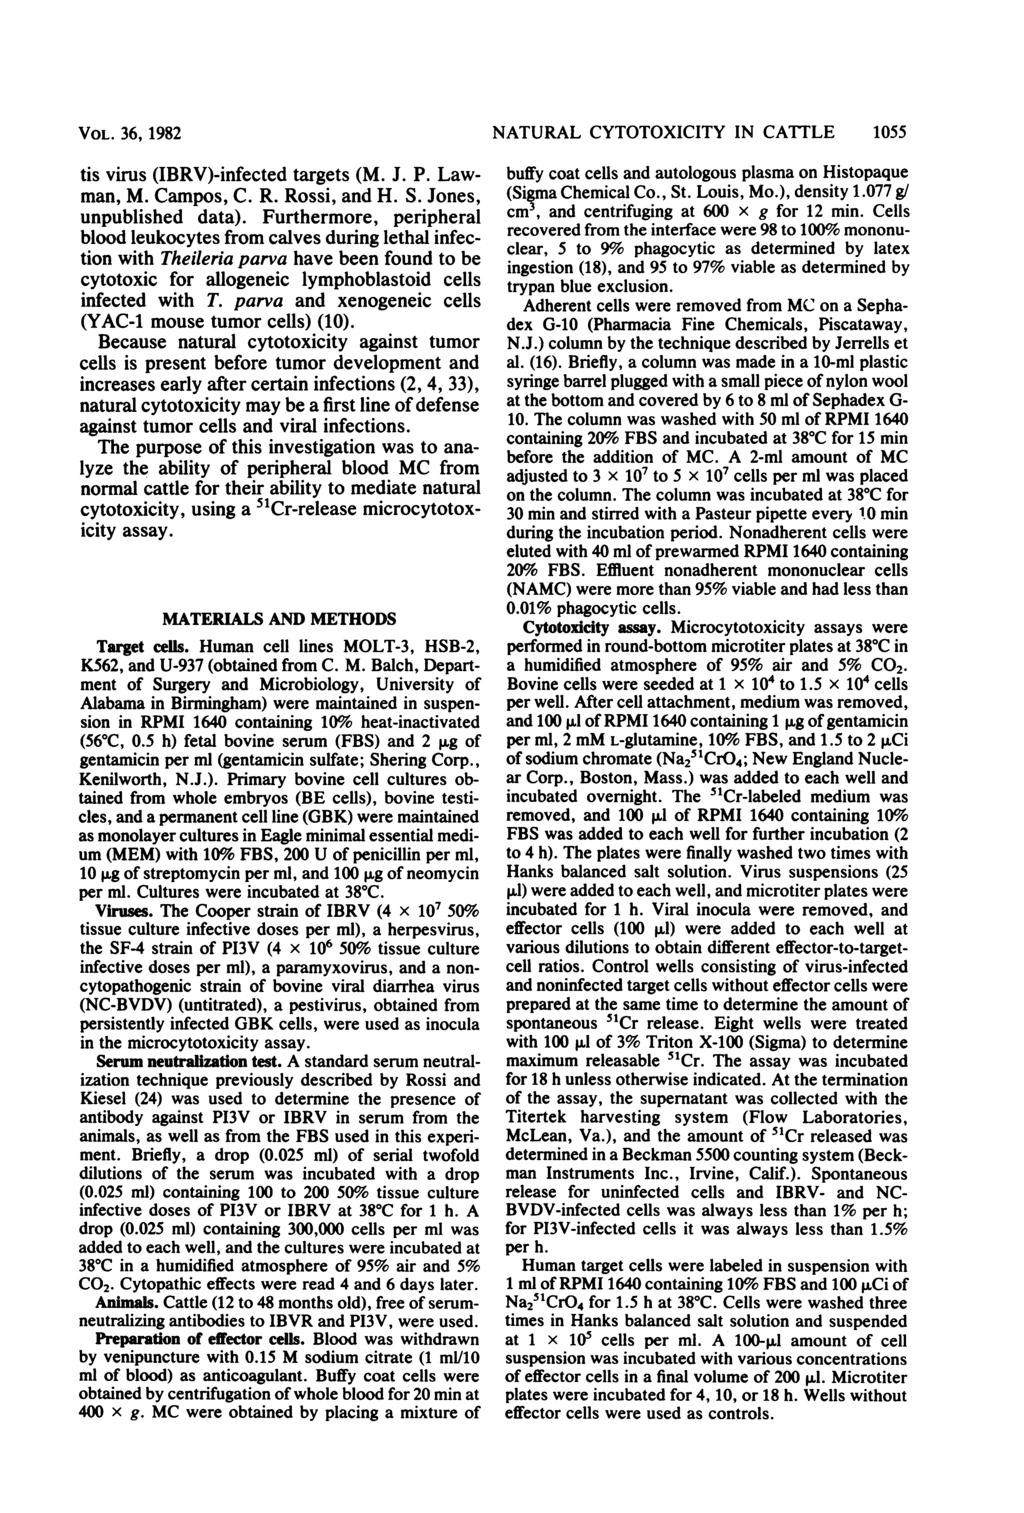 VOL. 36, 1982 tis virus (IBRV)-infected targets (M. J. P. Lawman, M. Campos, C. R. Rossi, and H. S. Jones, unpublished data).